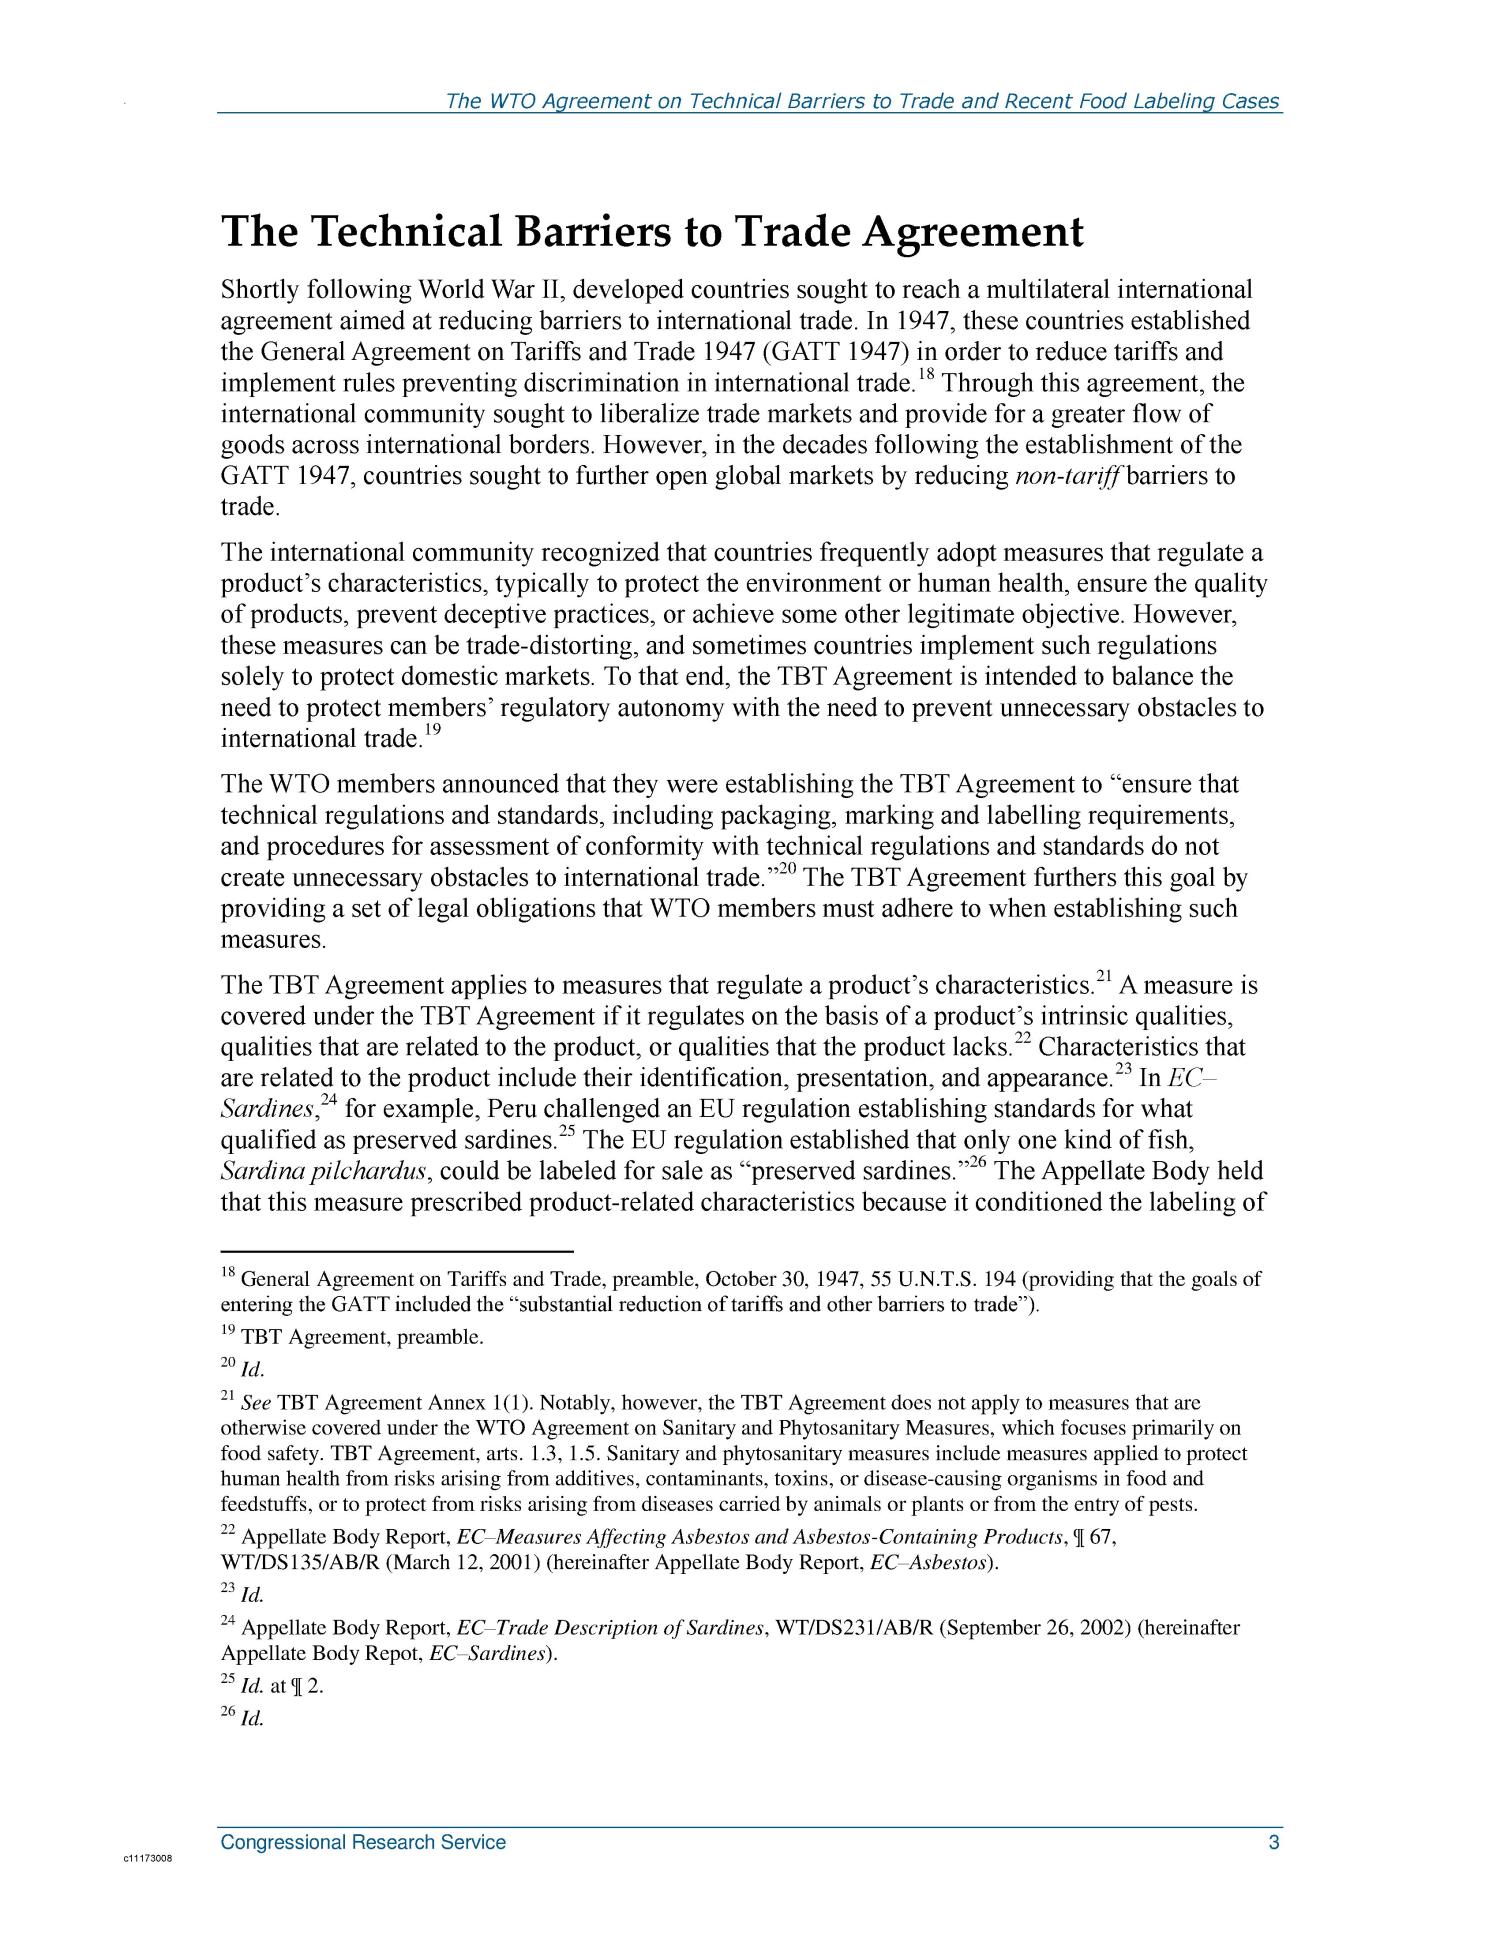 The World Trade Organization Agreement on Technical Barriers to Trade and Recent Food Labeling Cases
                                                
                                                    [Sequence #]: 6 of 25
                                                